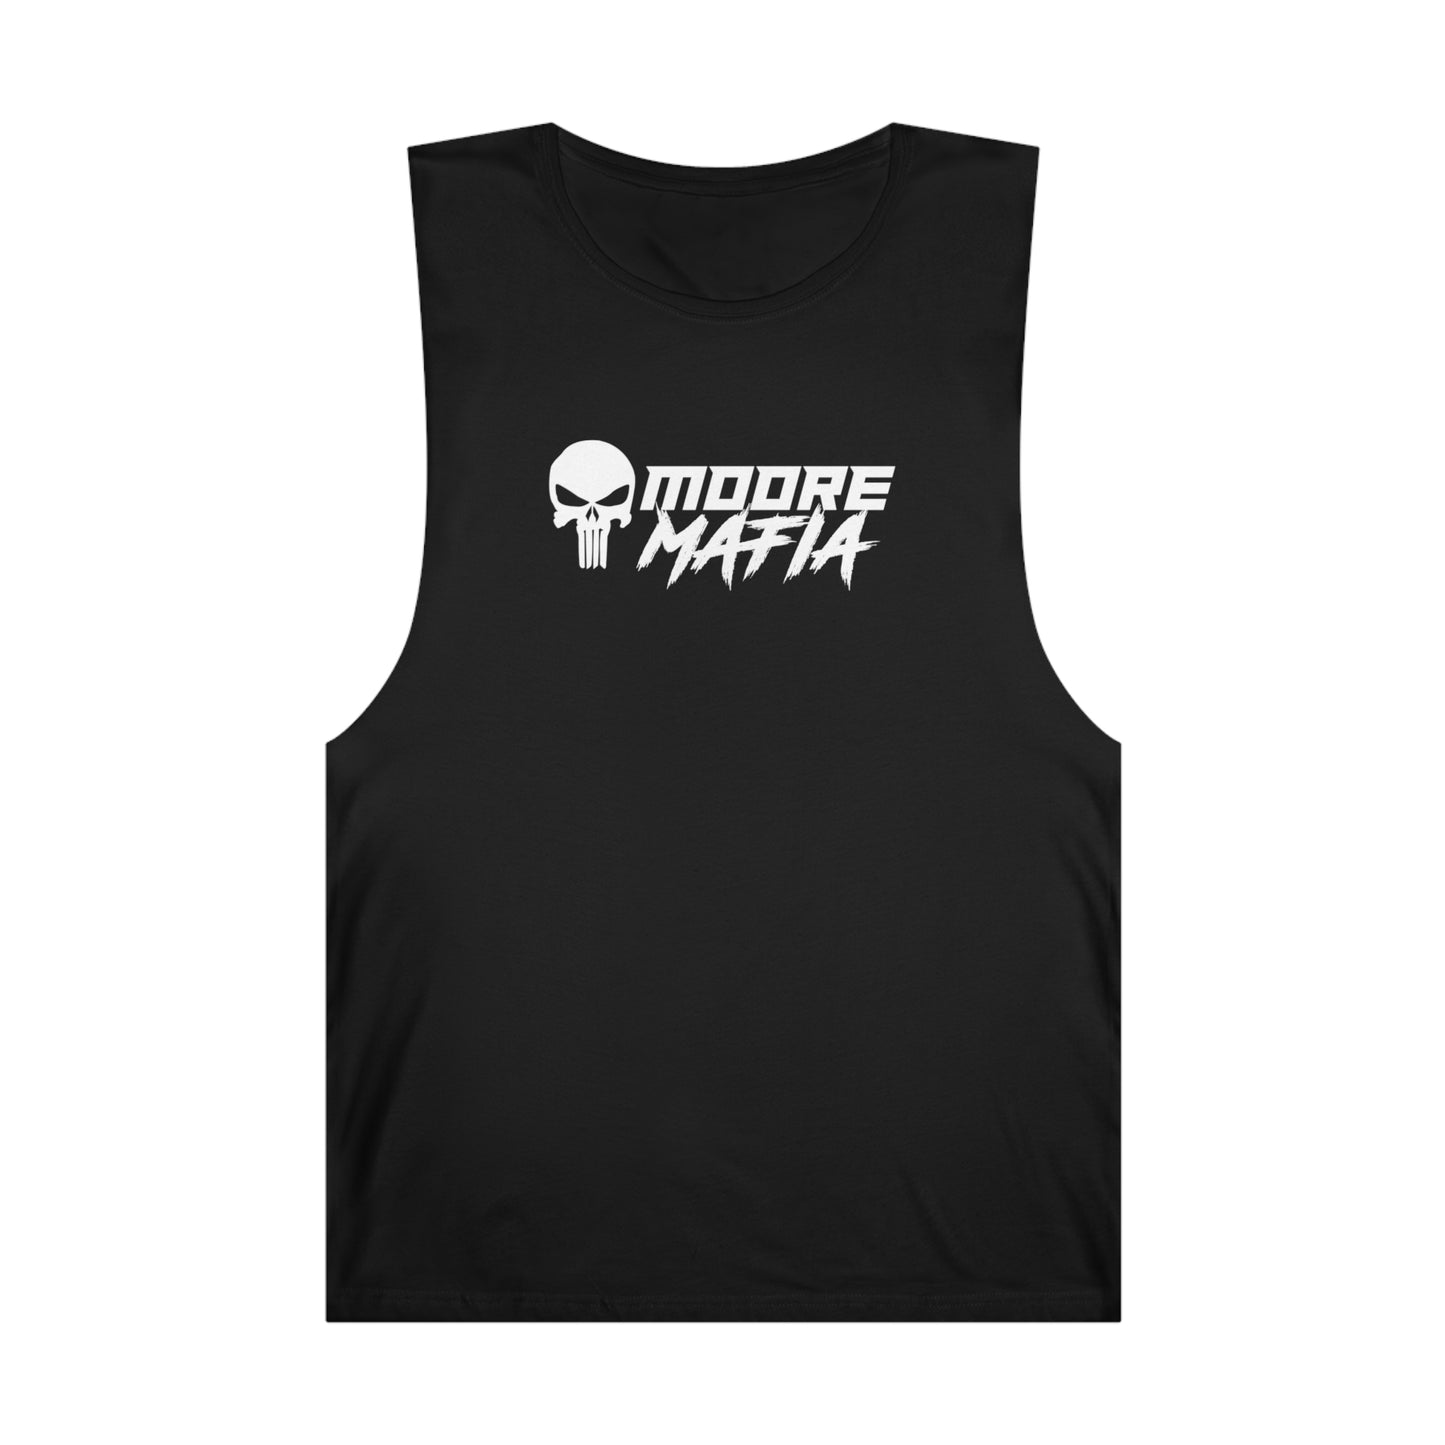 Plan For Today Unisex Muscle Tank